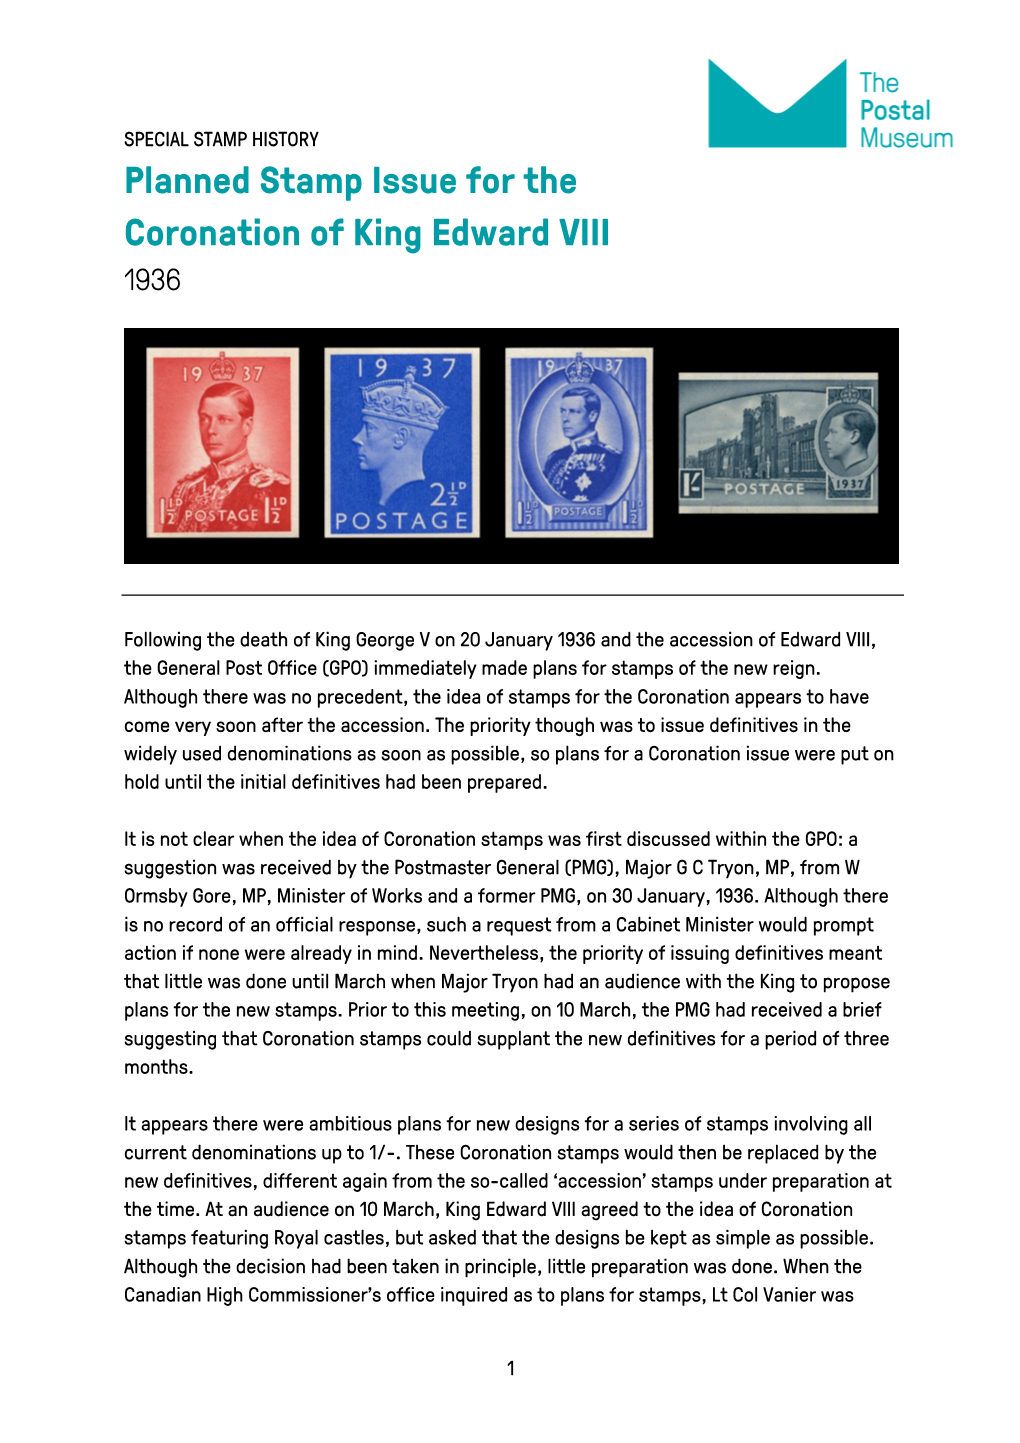 Planned Stamp Issue for the Coronation of King Edward VIII 1936